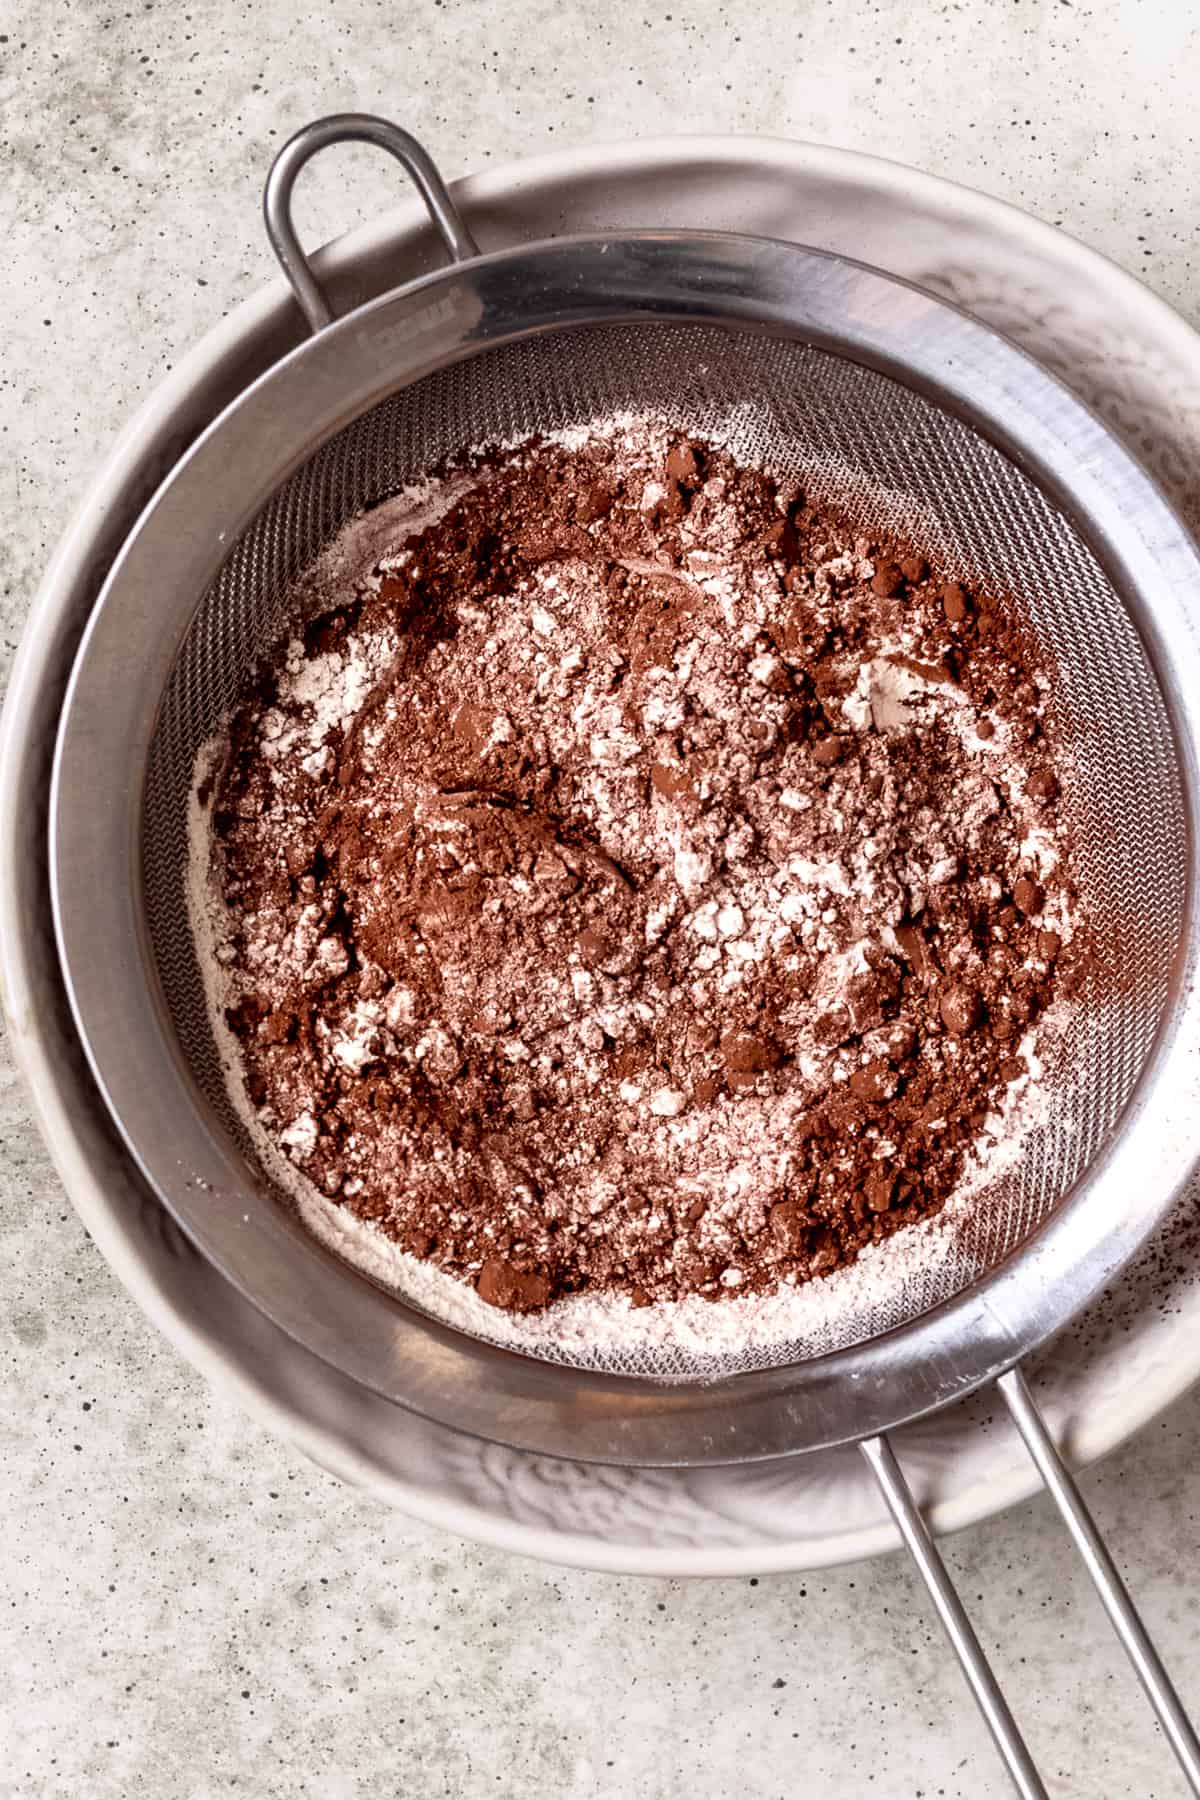 Sifted cocoa powder and flour in a bowl.